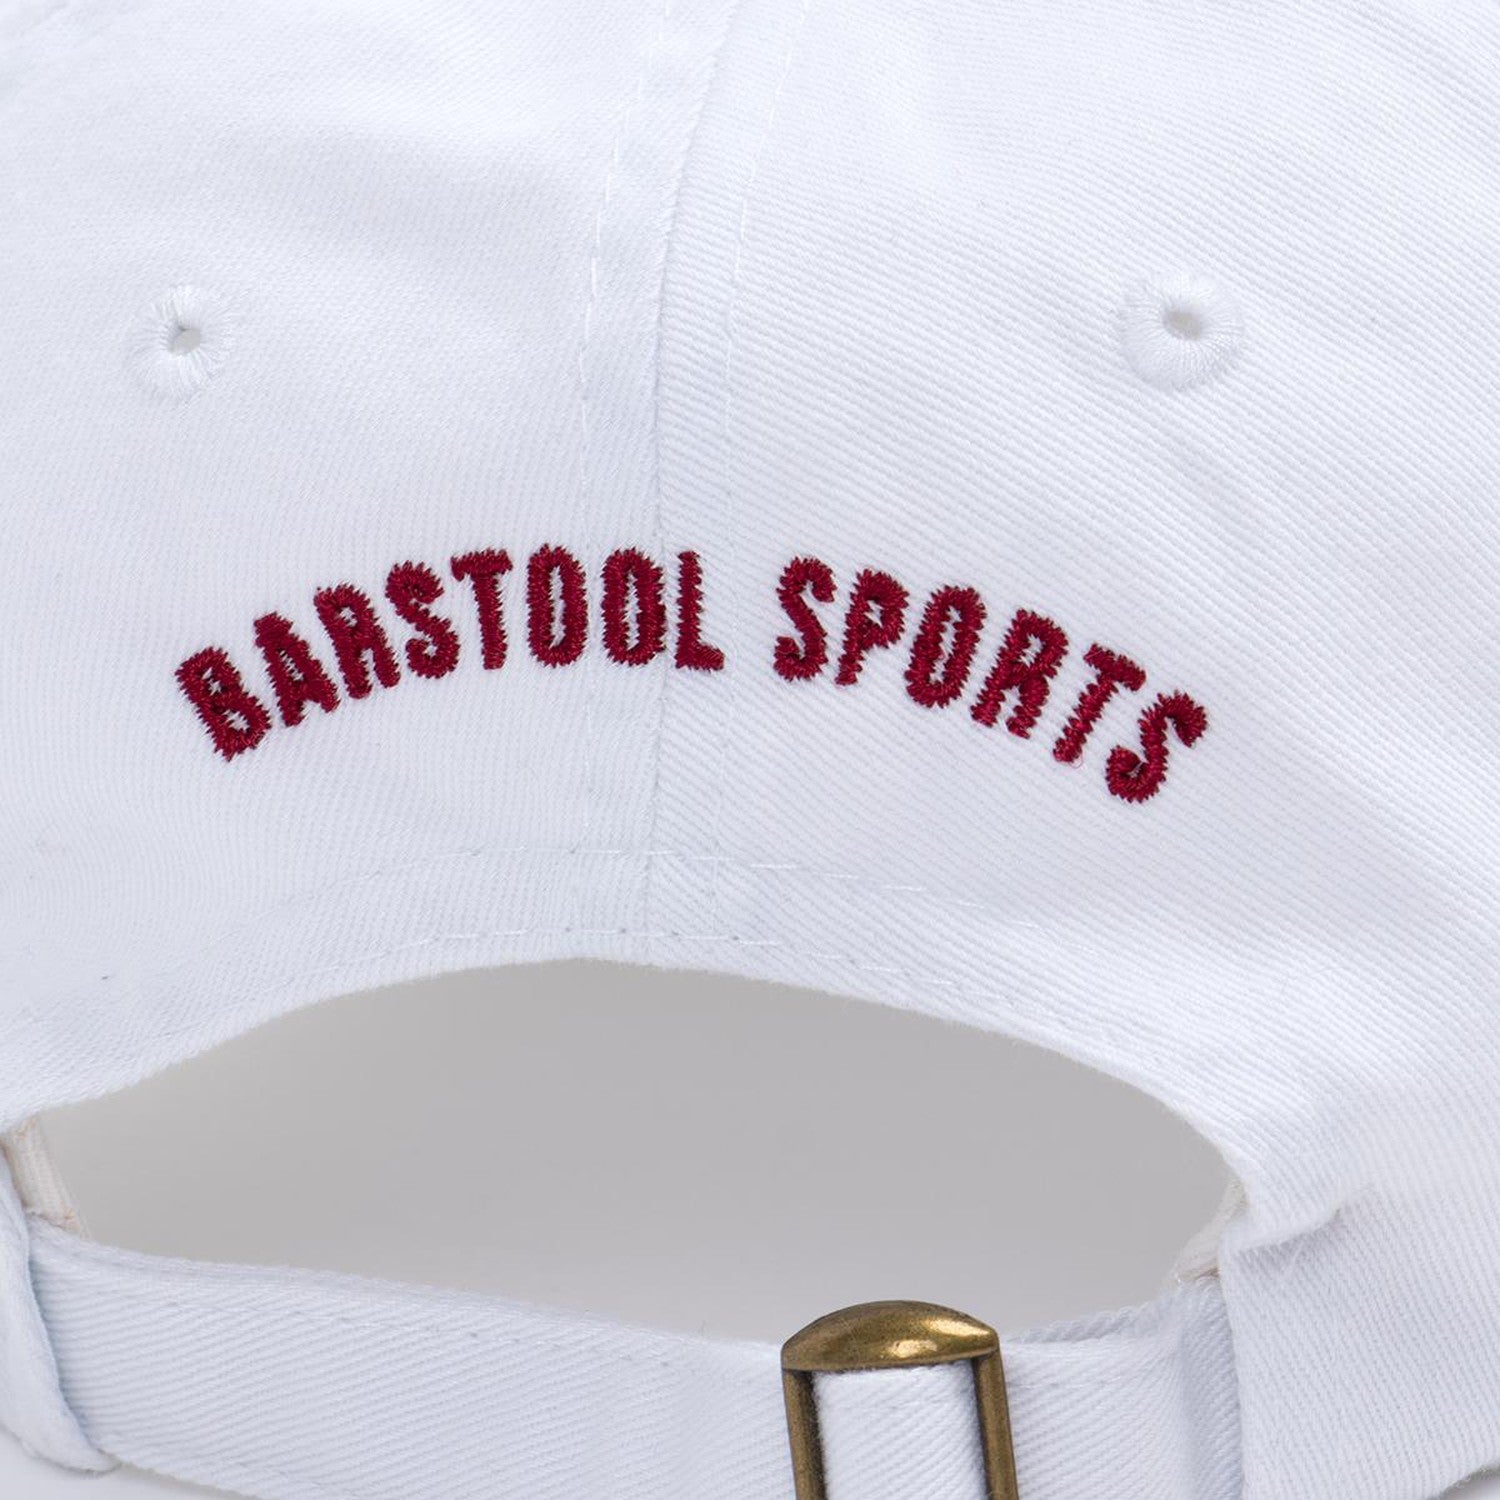 Bussin With The Boys Logo Dad Hat-Hats-Bussin With The Boys-Barstool Sports